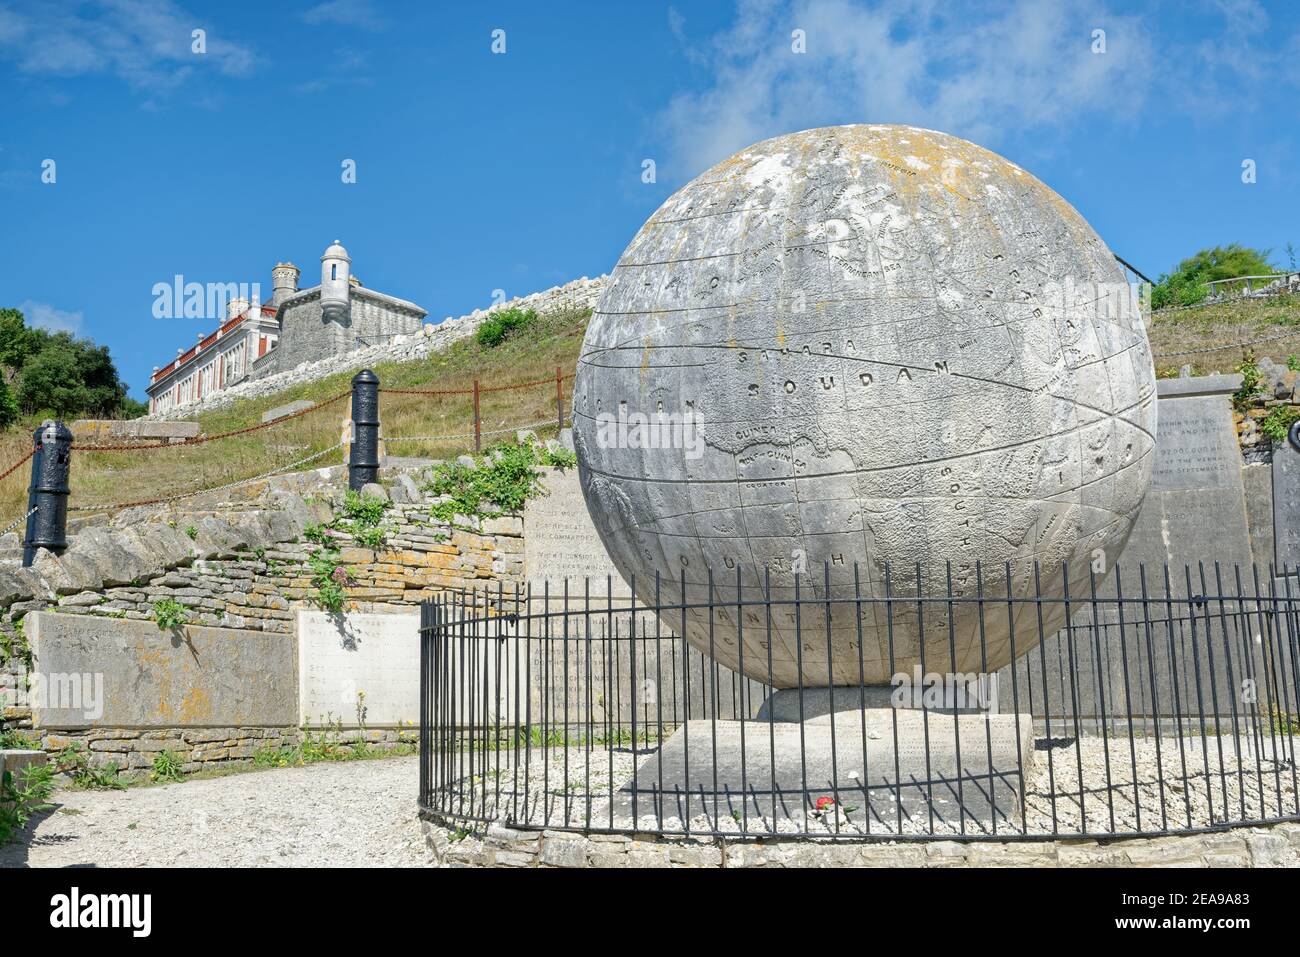 The Great Globe, a 40 ton Portland stone globe with a map of the world carved on the surface, below Durlston Castle, Durlston Head, Swanage, Dorset UK Stock Photo